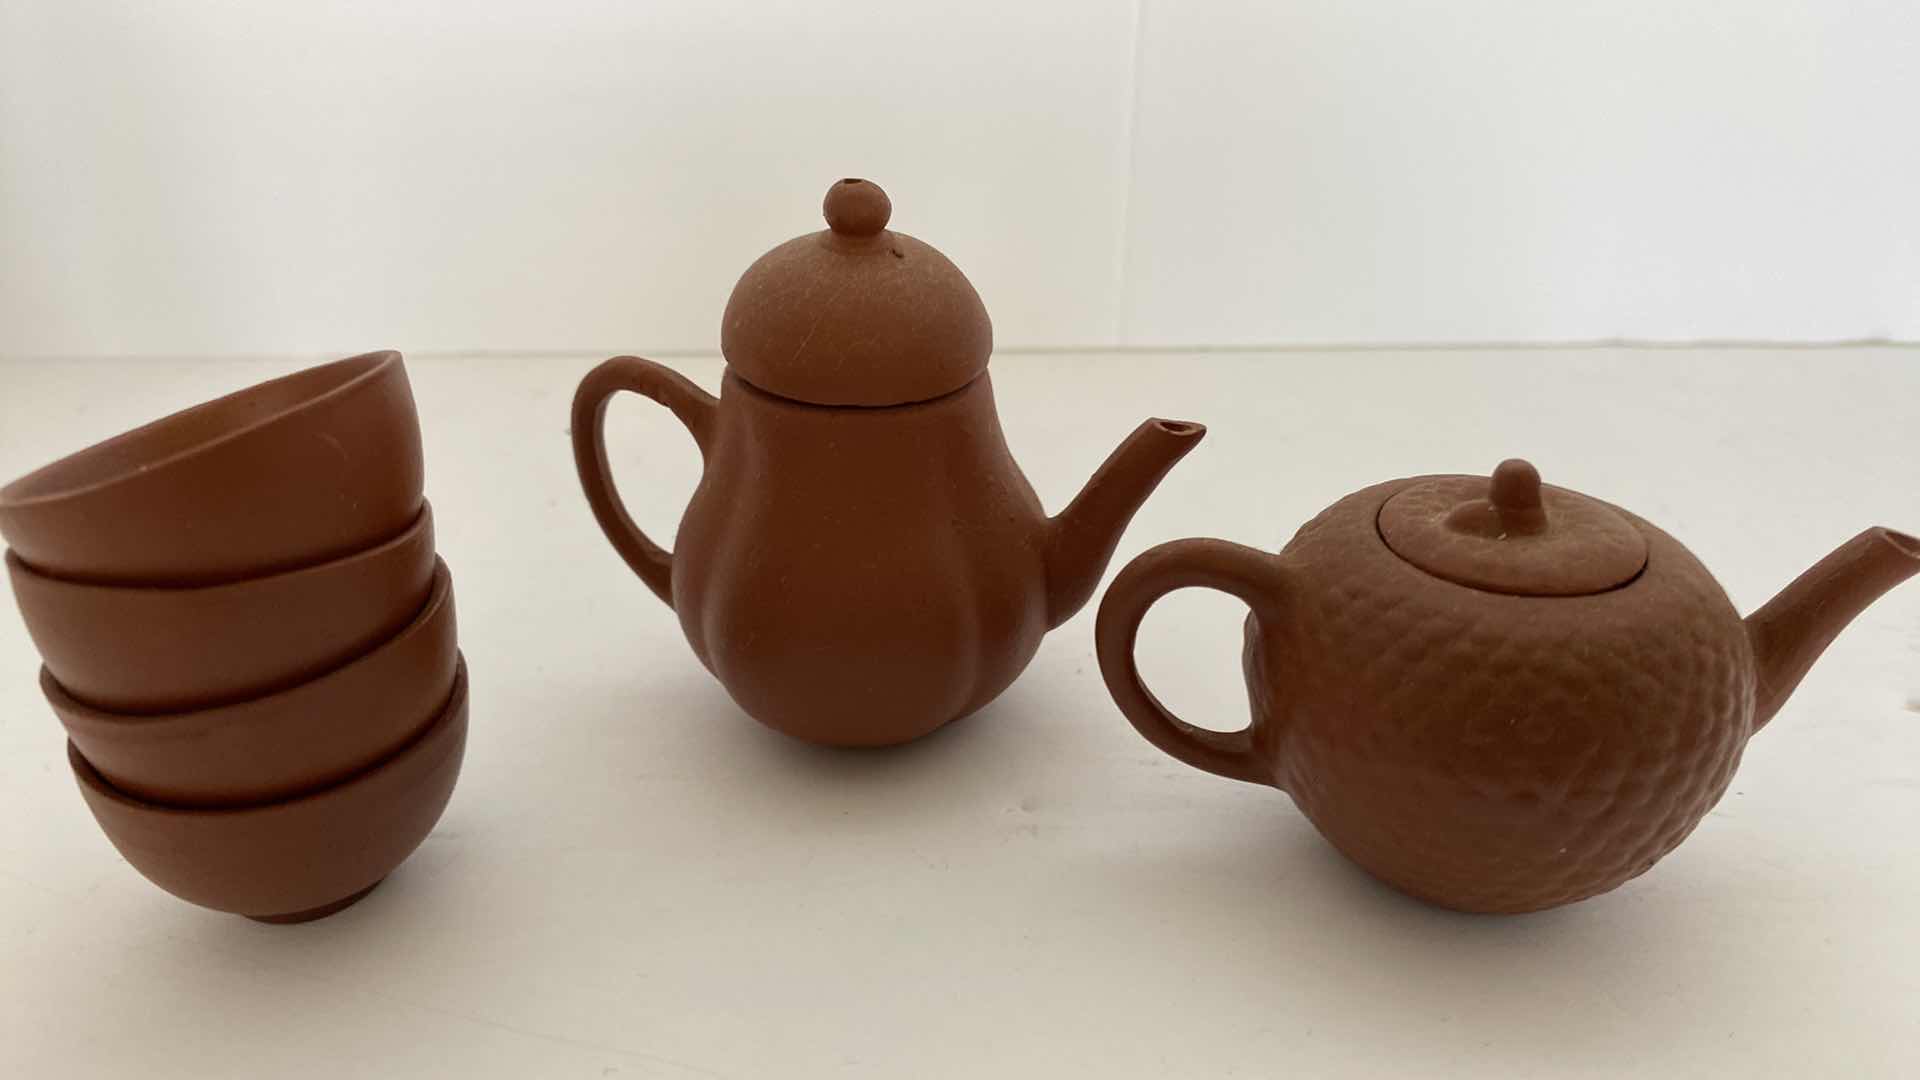 Photo 2 of PAIR OF VINTAGE CHINESE COLLECTIBLE CLAY TEA POTS WITH 4 TEA CUPS LARGEST TEAPOT 3” x 2”